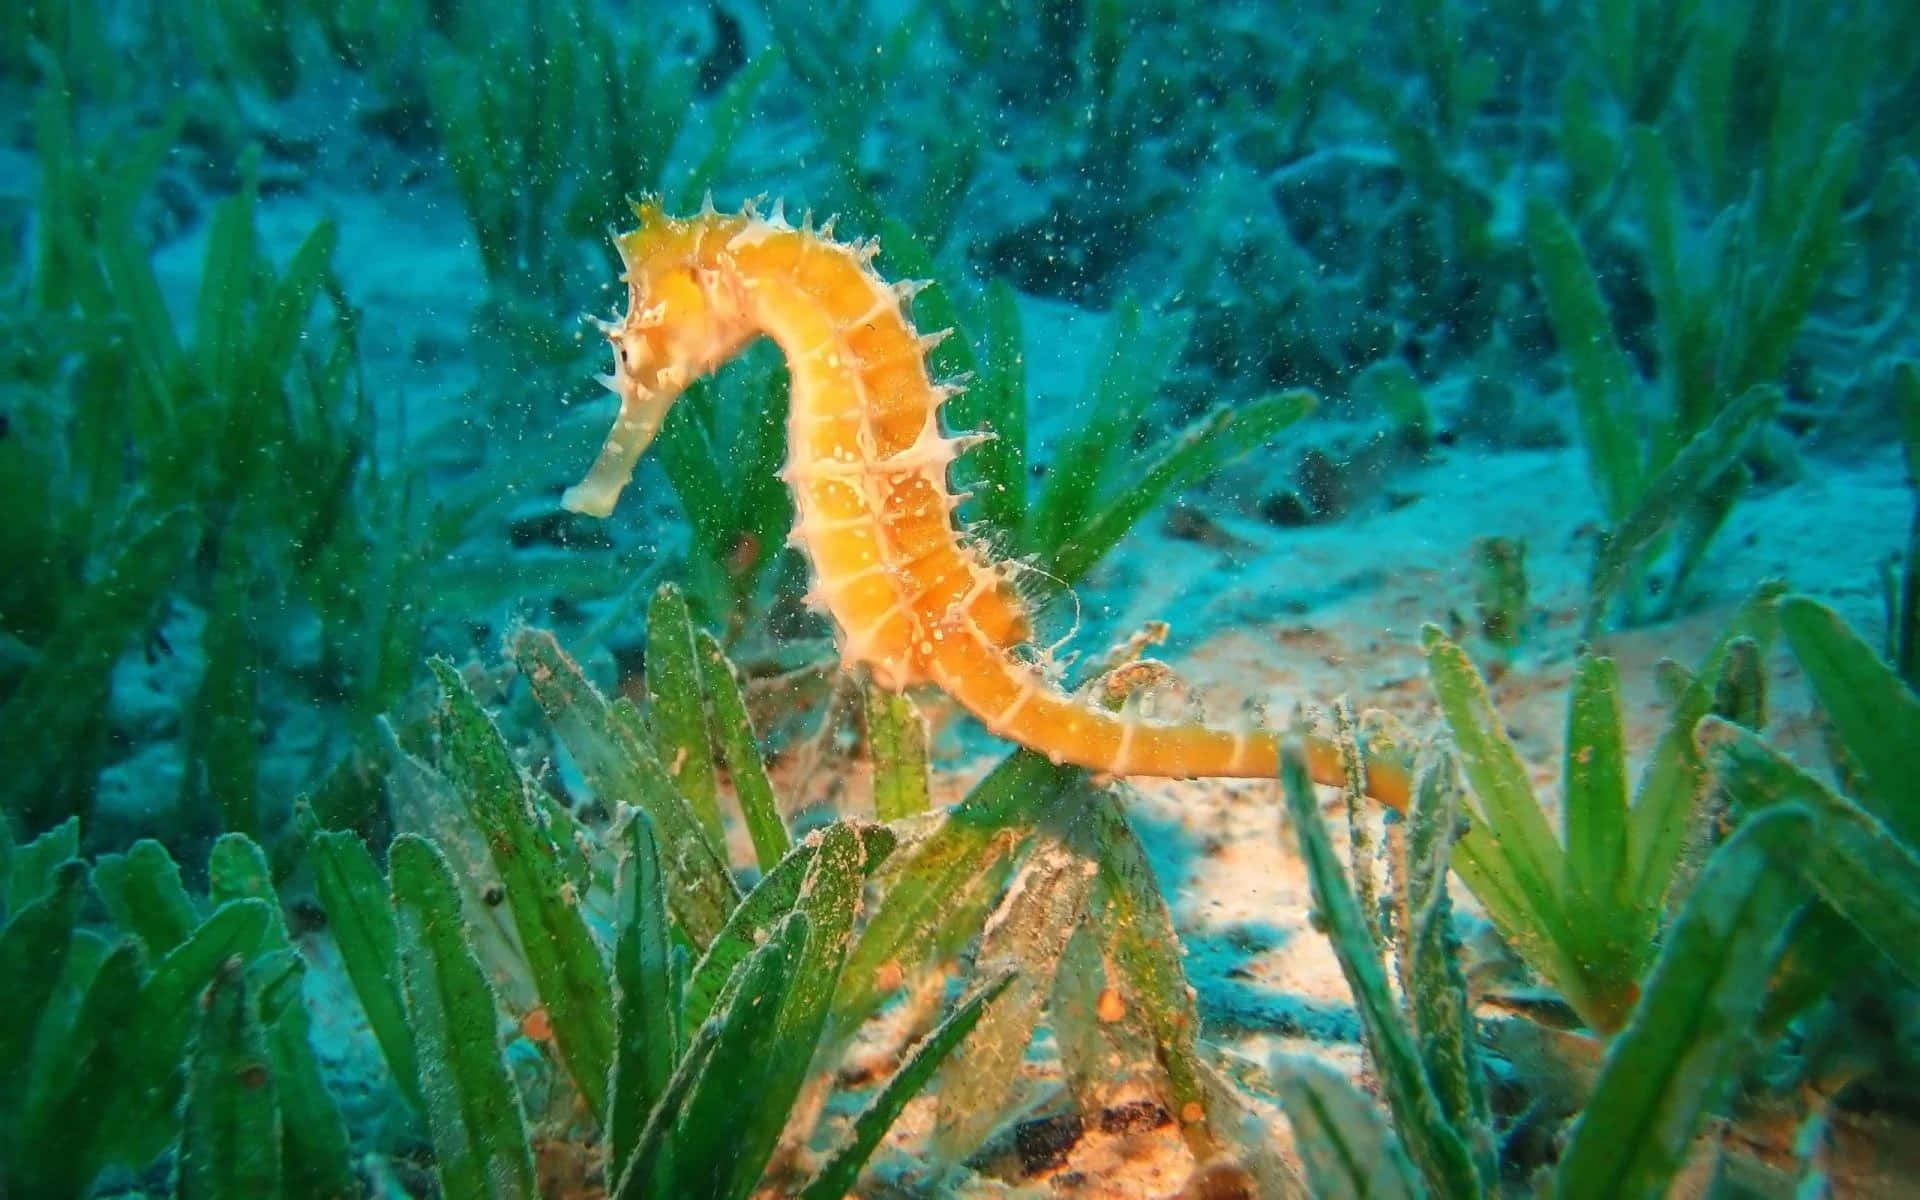 An elegant seahorse swims amongst the vibrant coral